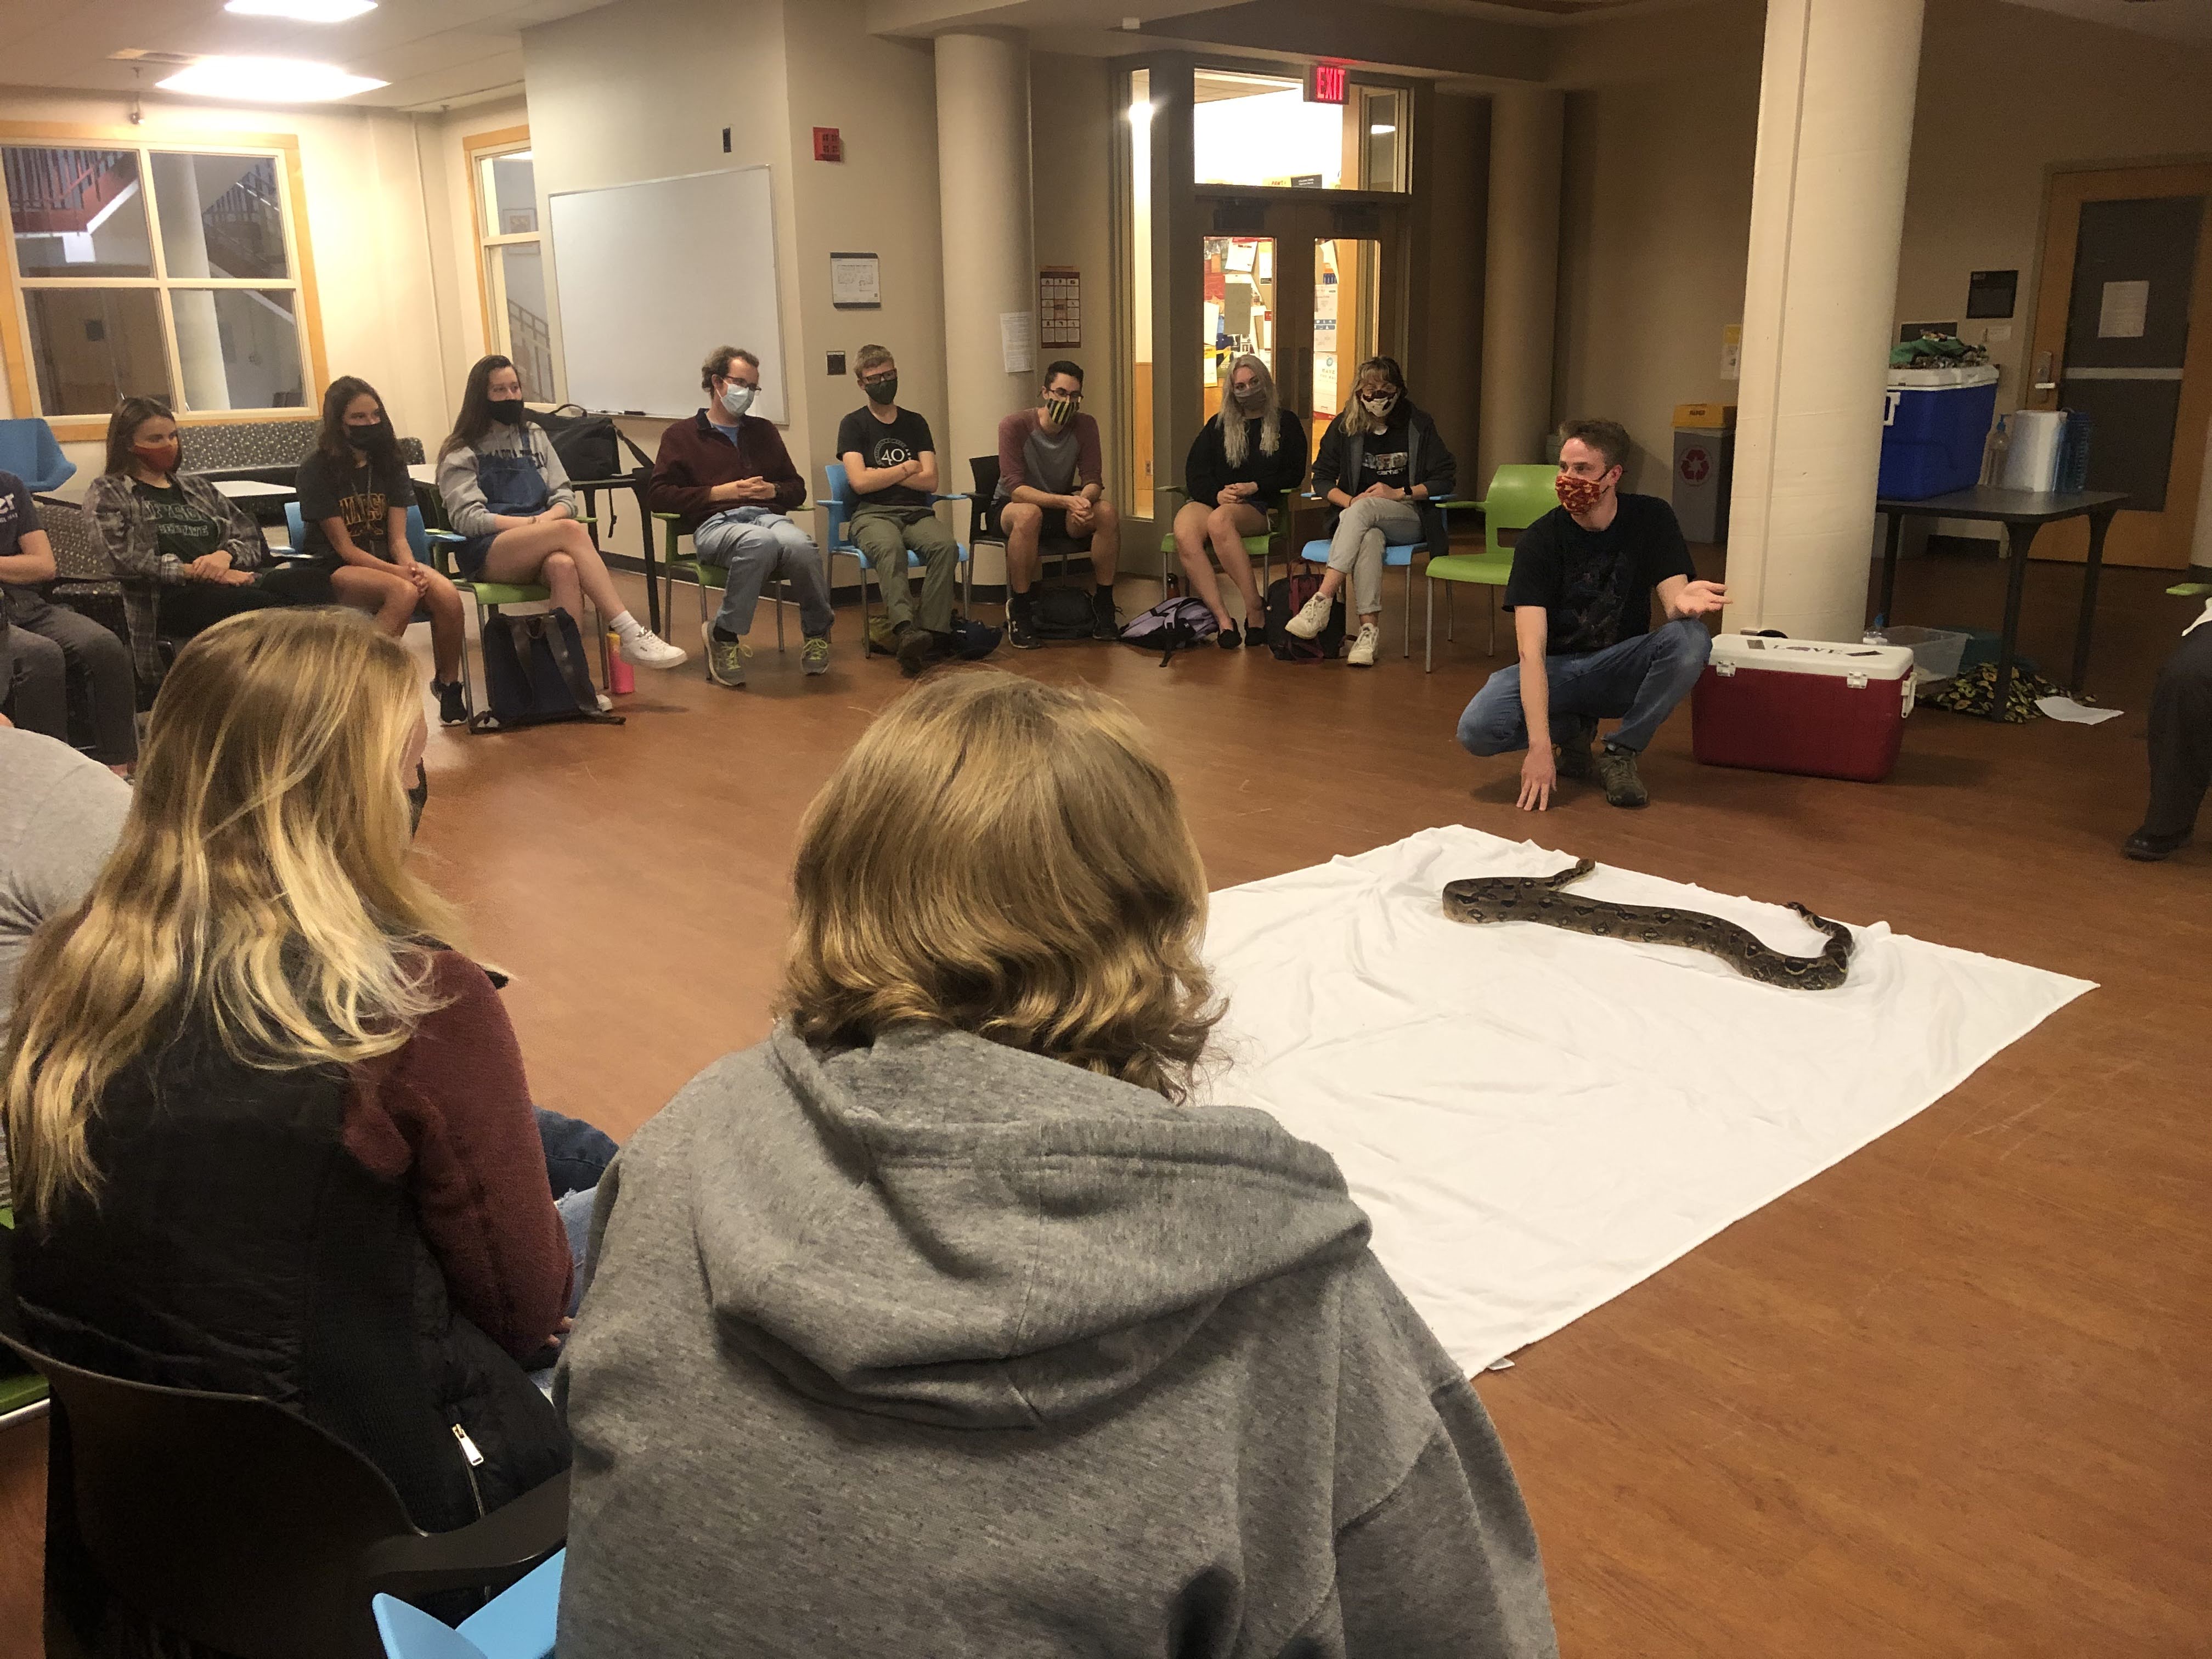 Students sitting in a circle around a boa constrictor on the floor